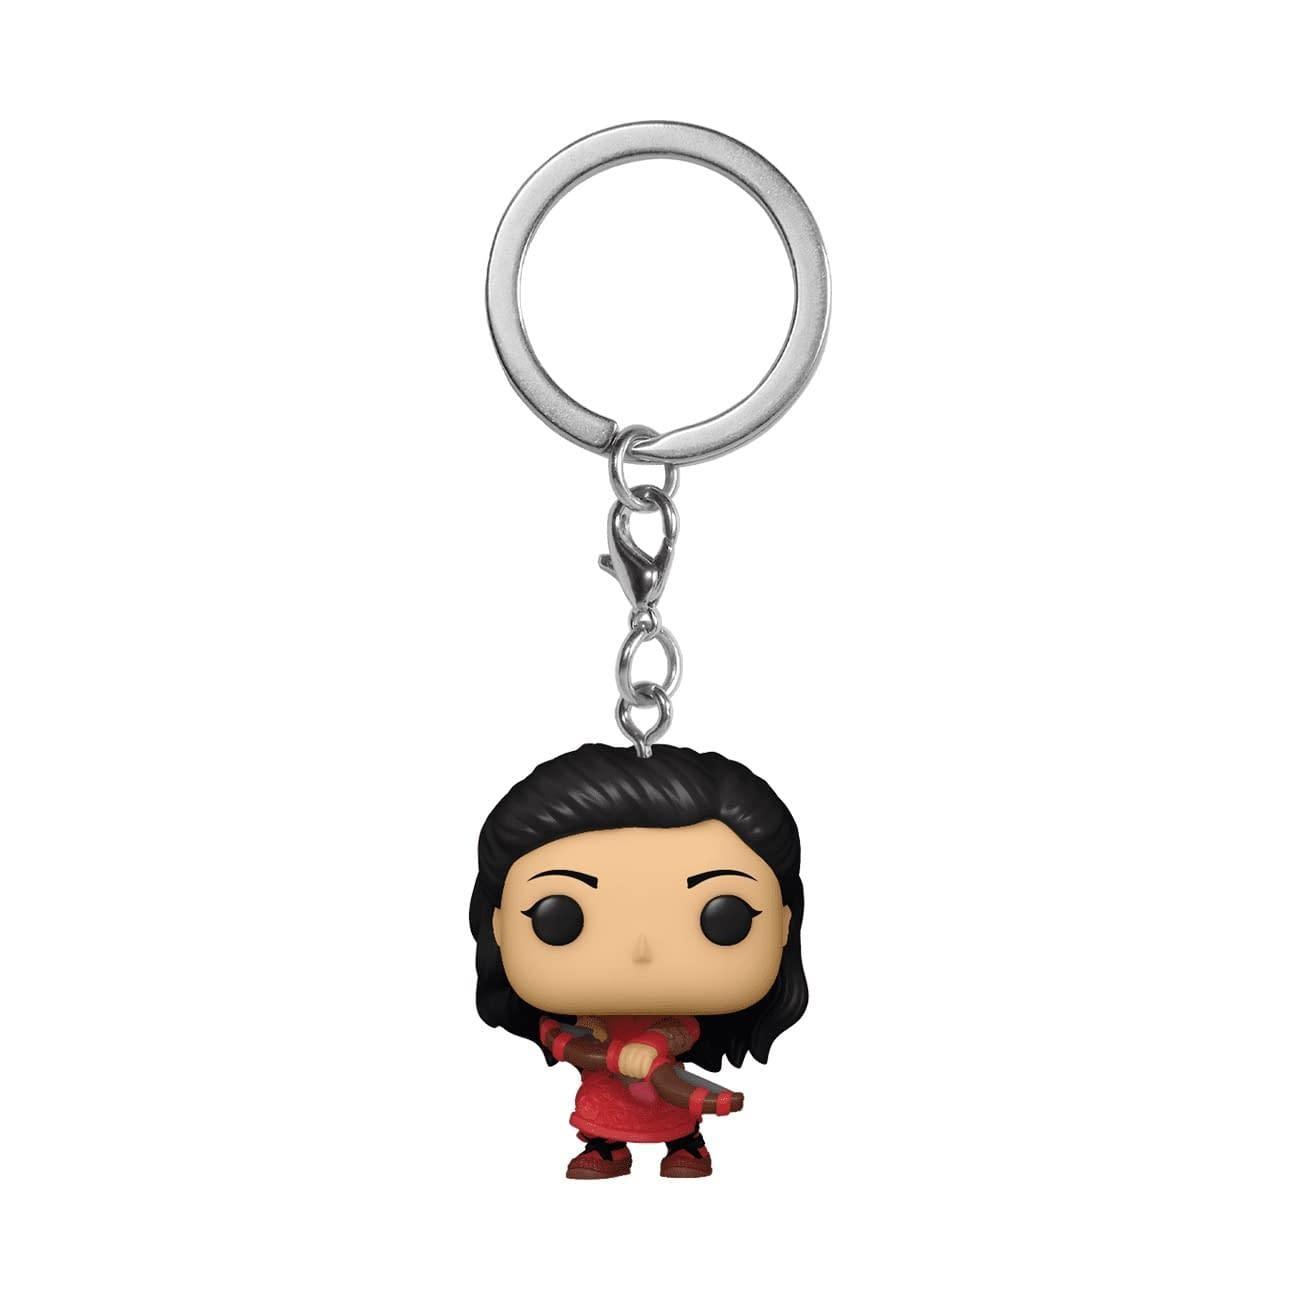 FUN53760 Shang-Chi: and the Legend of the Ten Rings - Katy Pocket Pop! Keychain - Funko - Titan Pop Culture